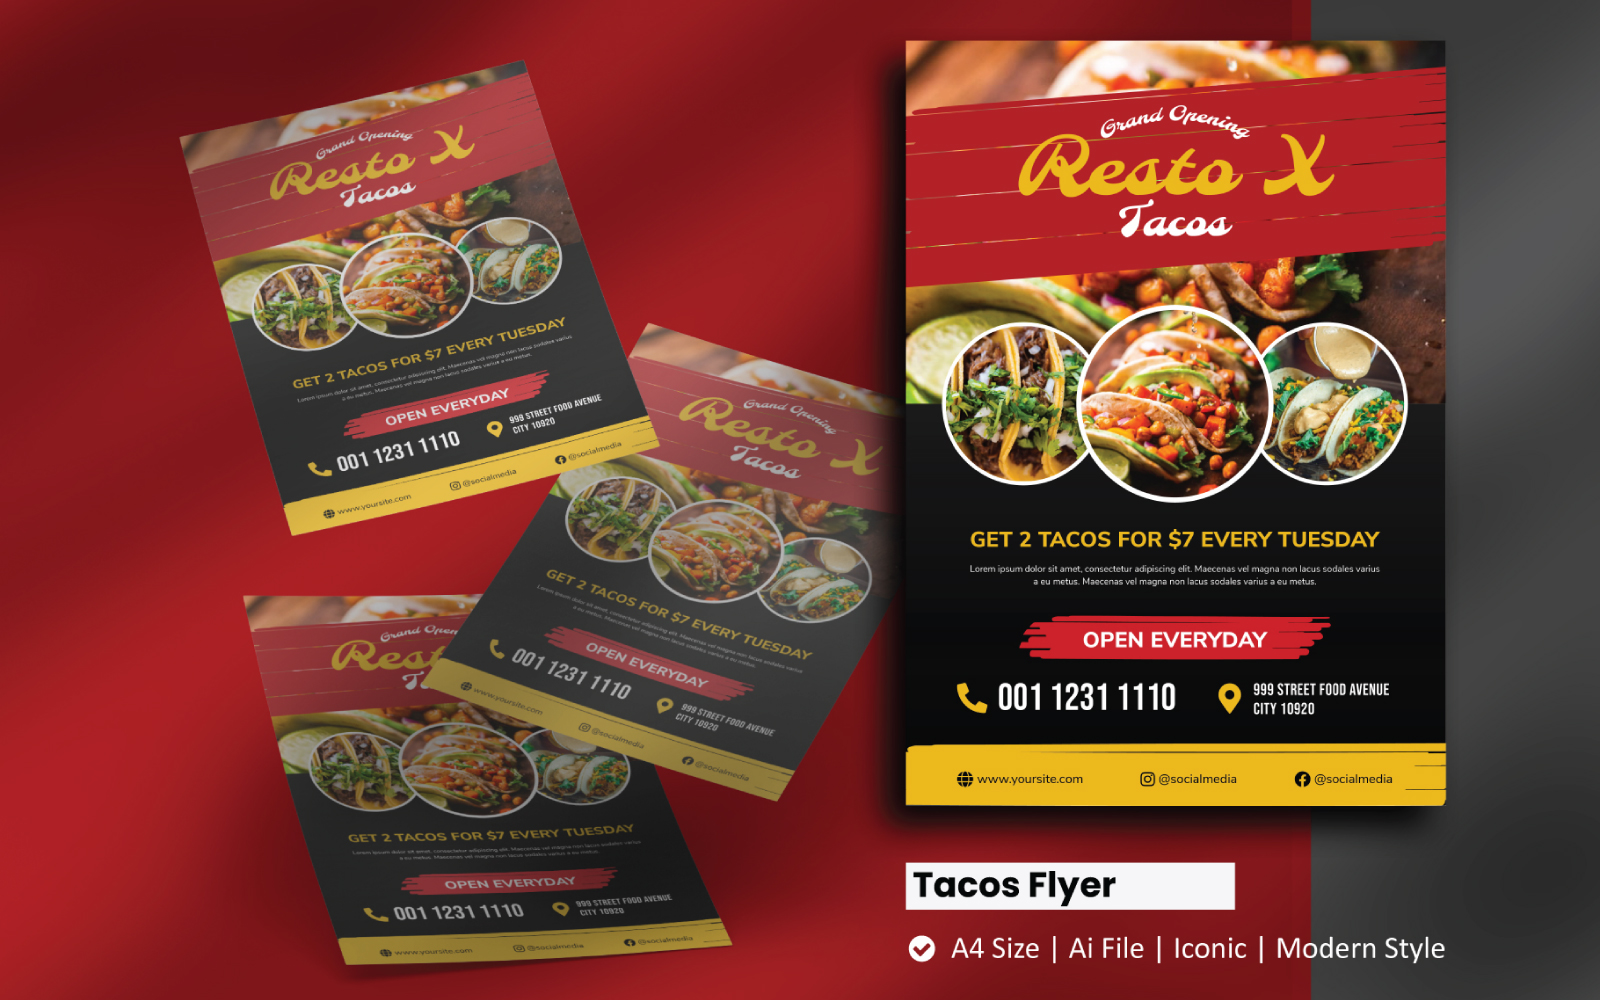 Tacos Grand Opening Flyer Corporate Identity Template